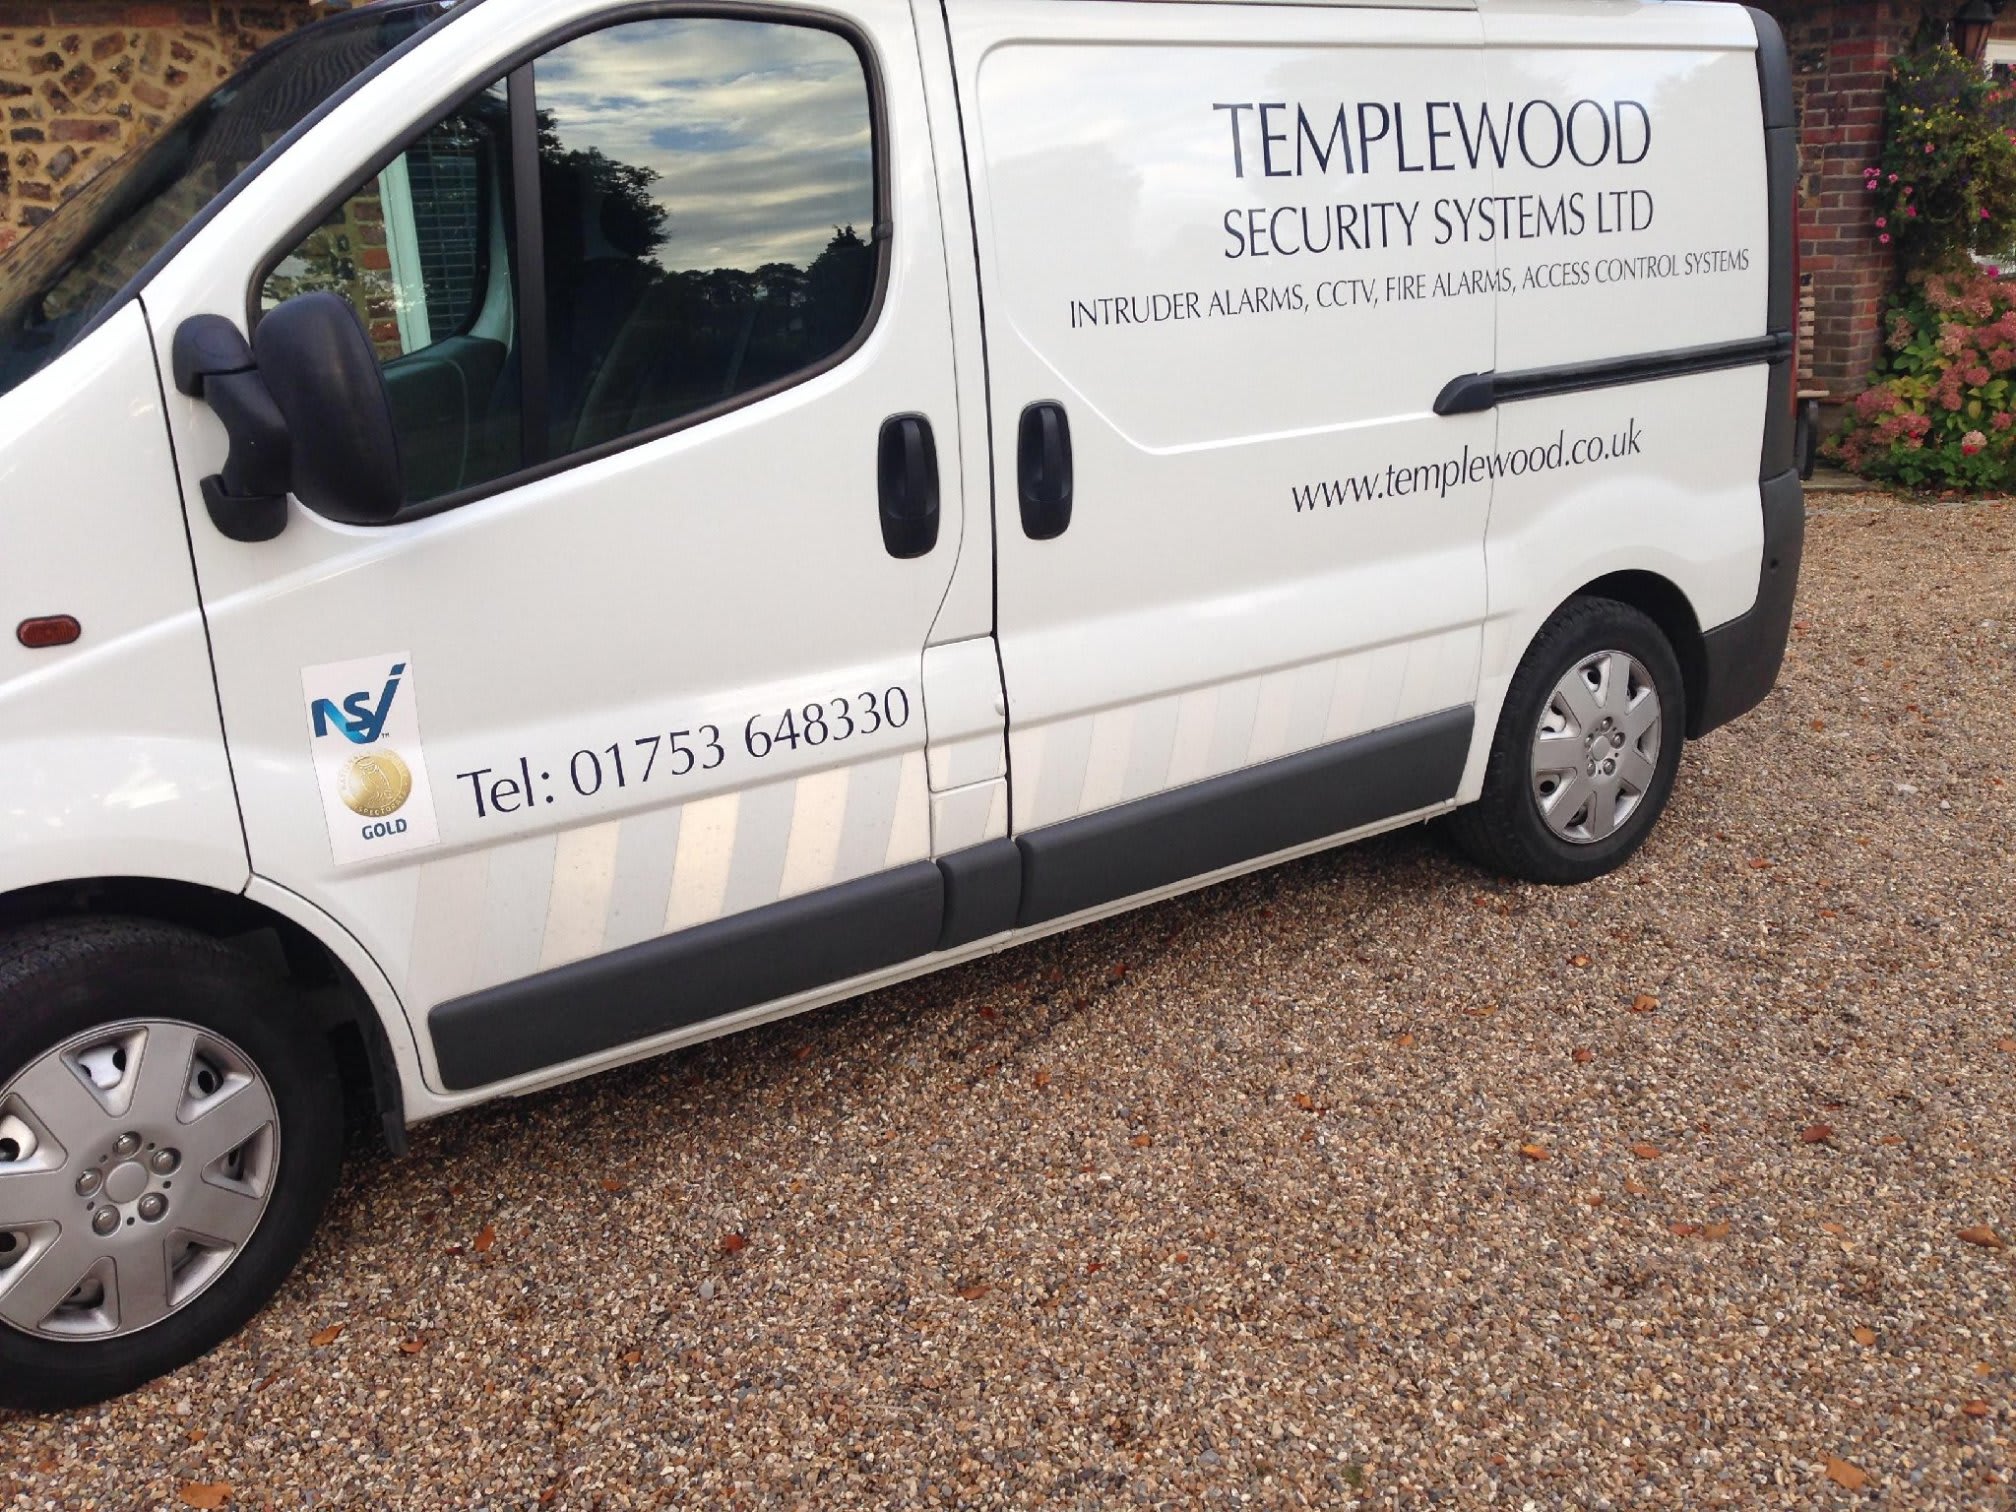 Images Templewood Security Systems Ltd